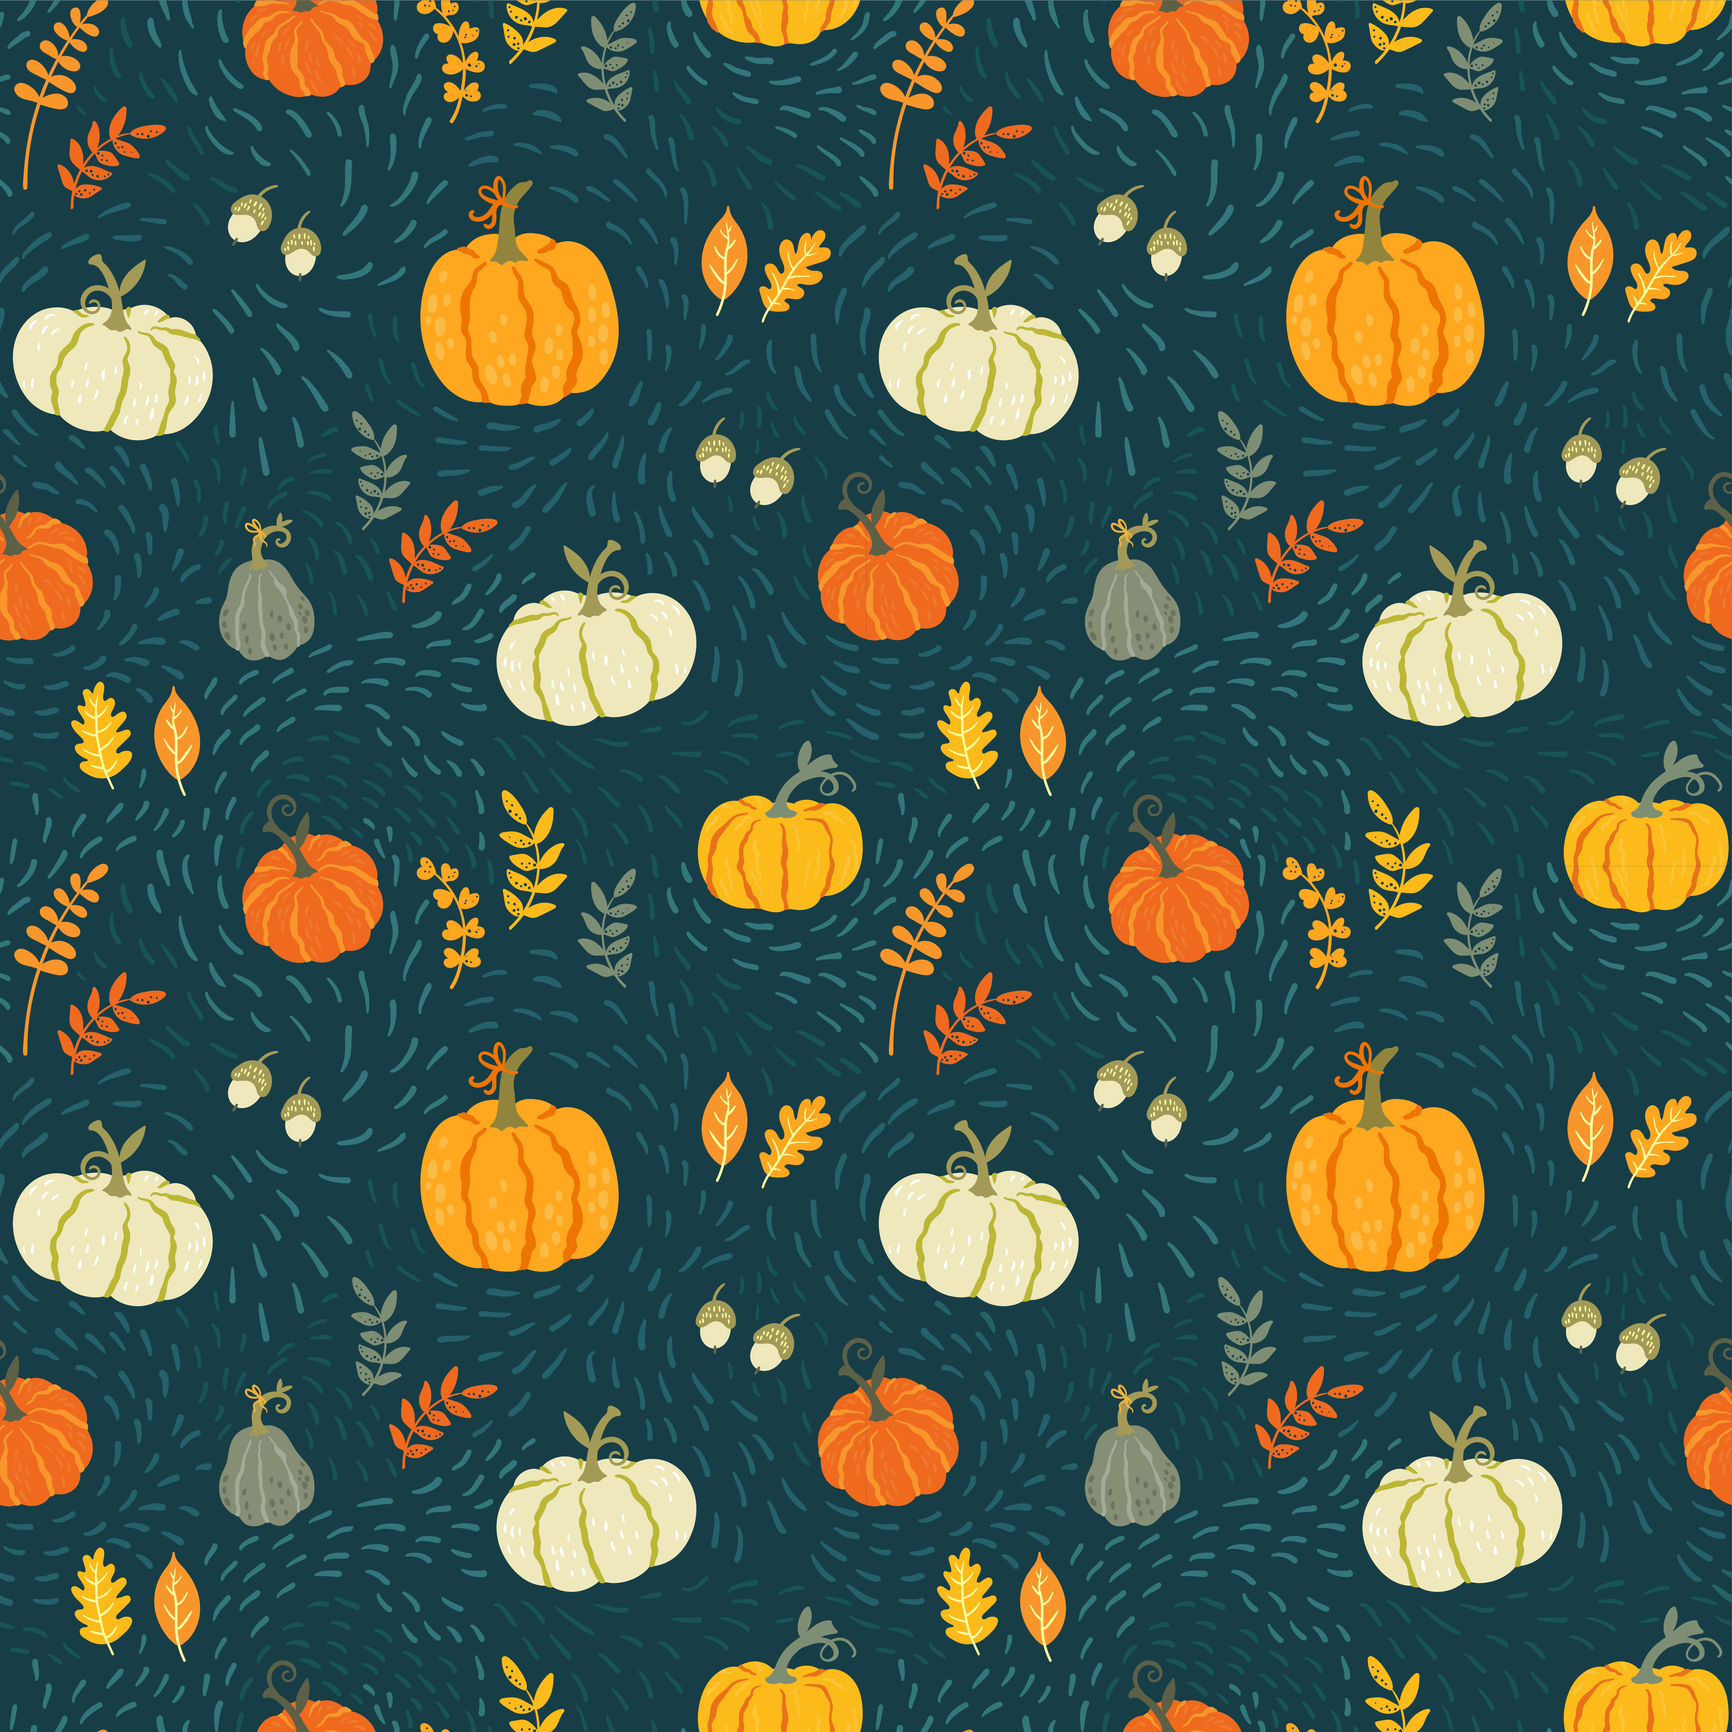 Thanksgiving 2021 Wallpapers - Wallpaper Cave